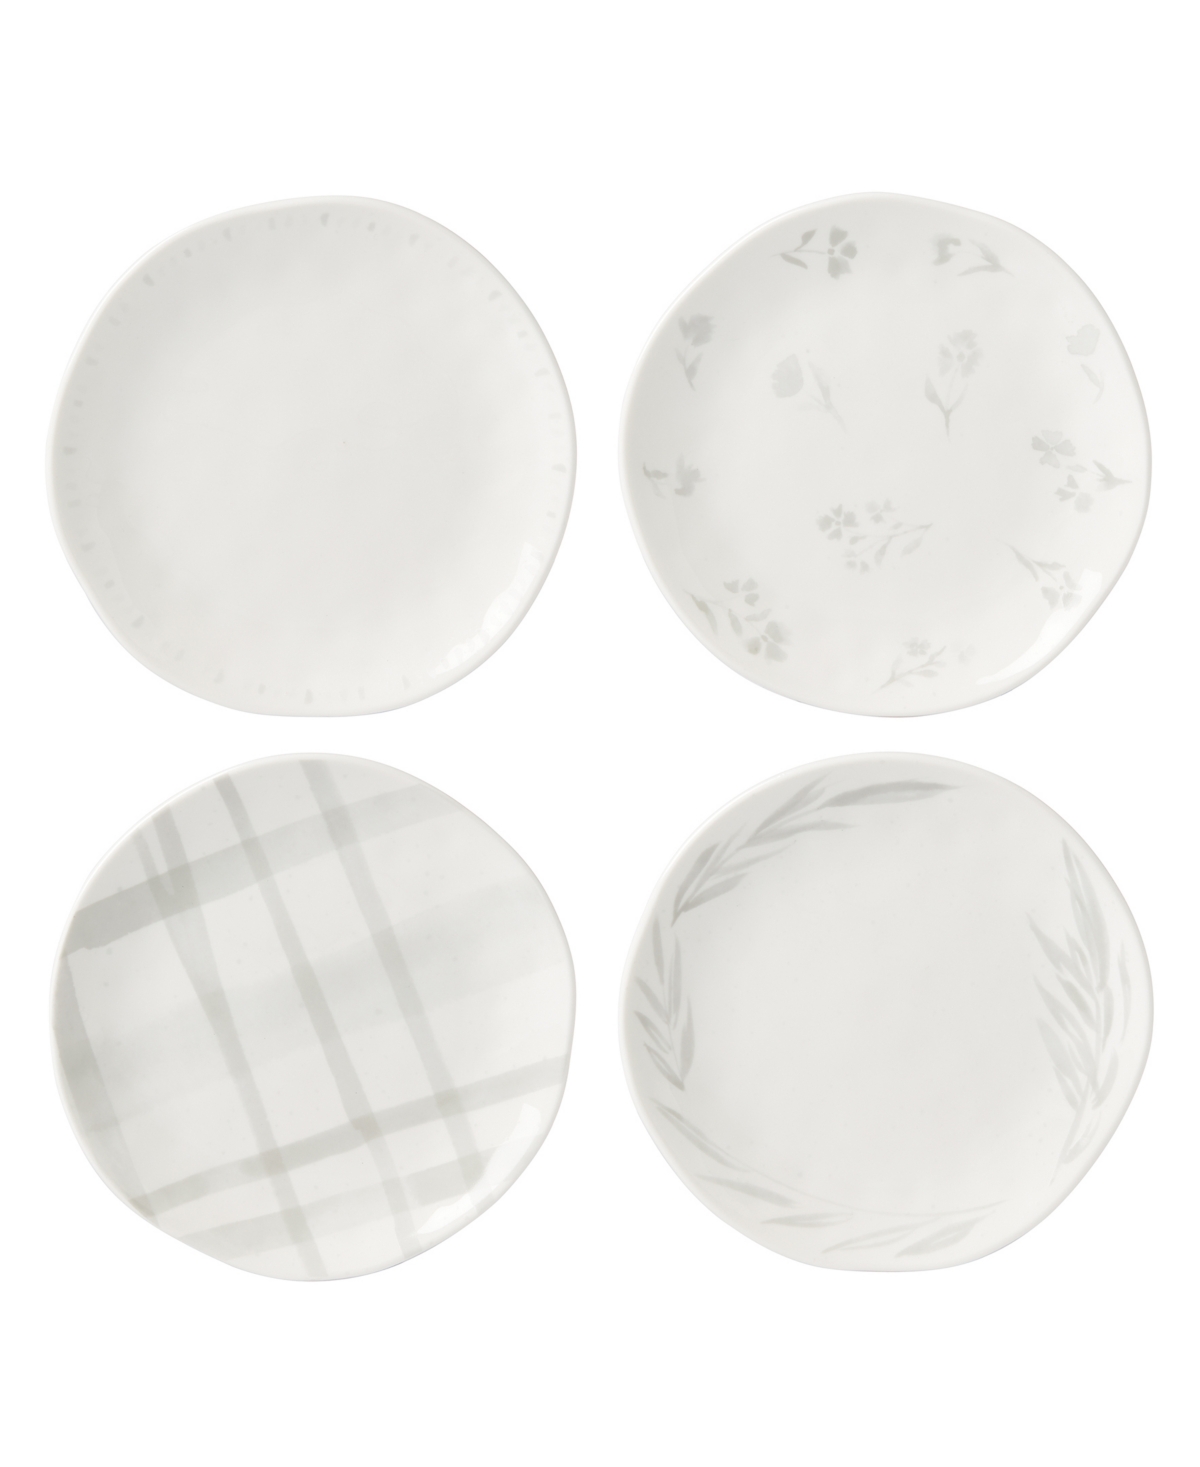 Oyster Bay Whiteware 4 Piece Tidbit Plate Set, Service for 4 - White